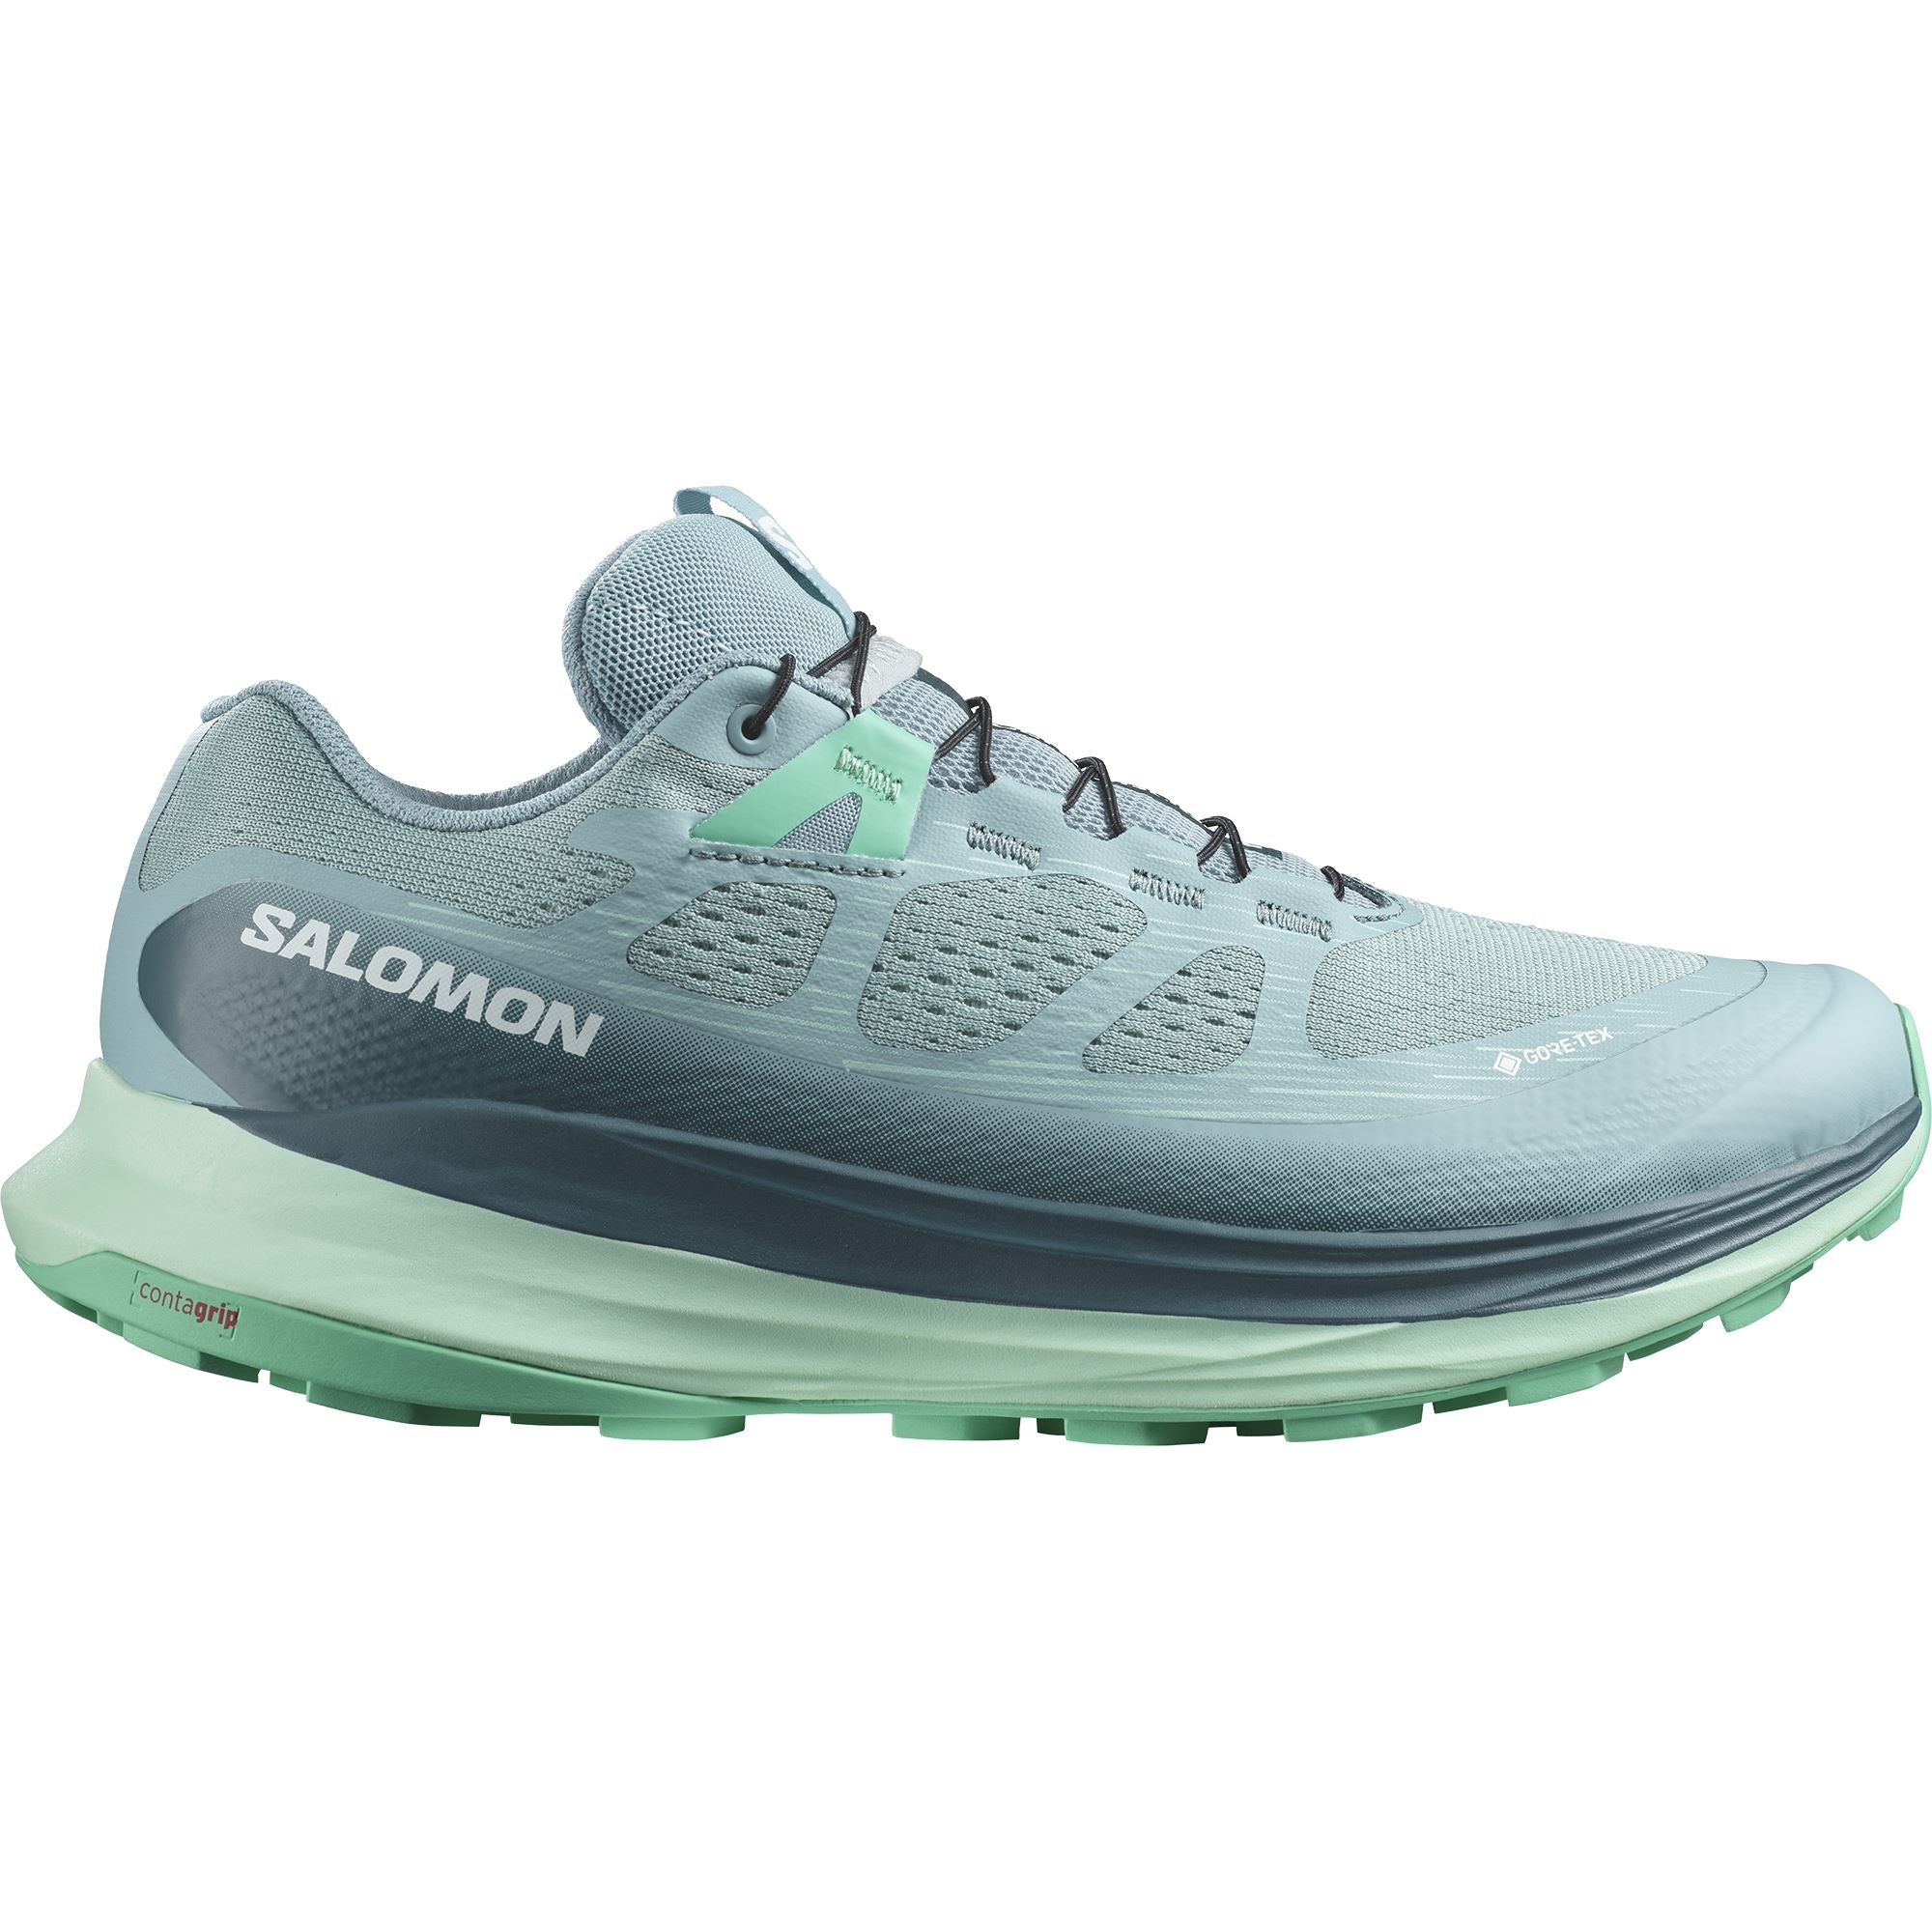 Salomon Ultra Glide 2 GTX Women's Trail Running Shoes Stone Blue / Yucca / Biscay Green US 6.5 